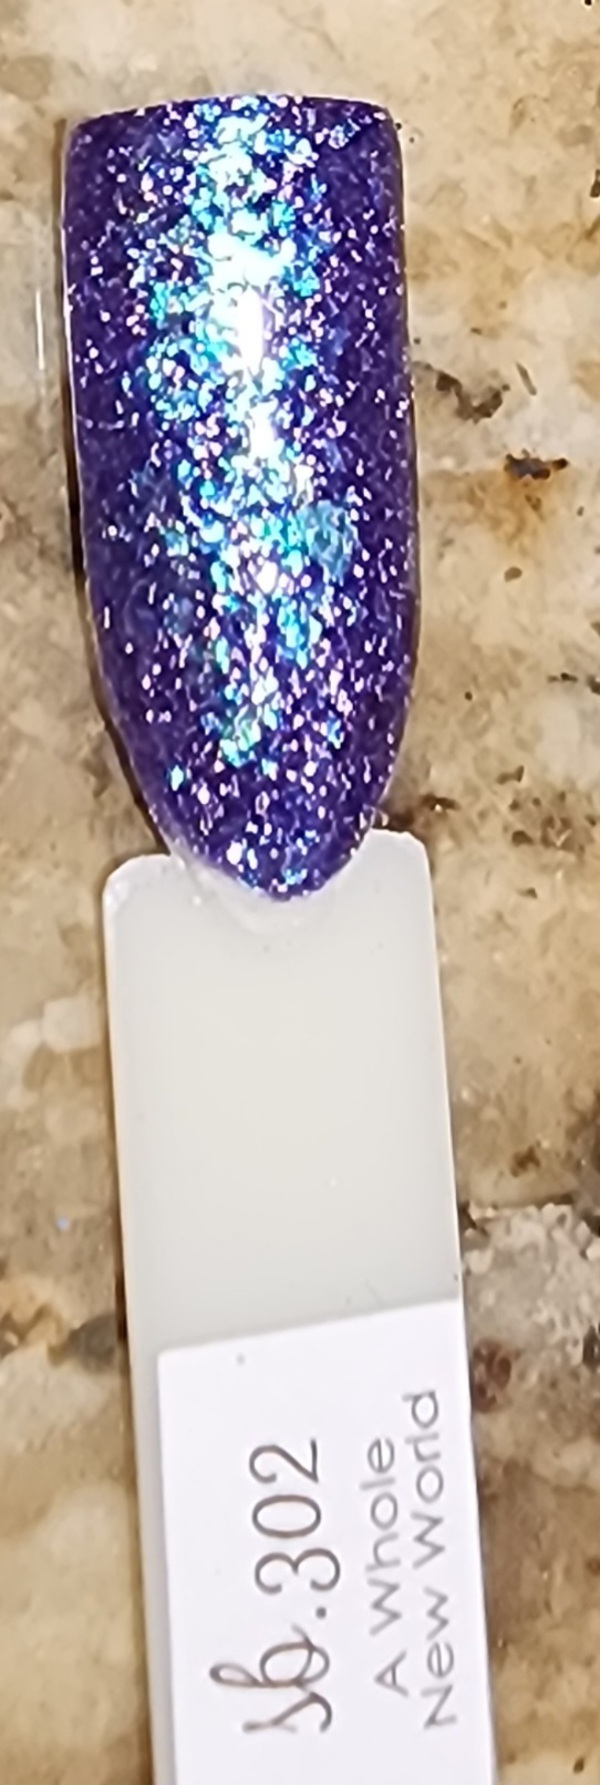 Nail polish swatch / manicure of shade Sparkle and Co. A whole new world